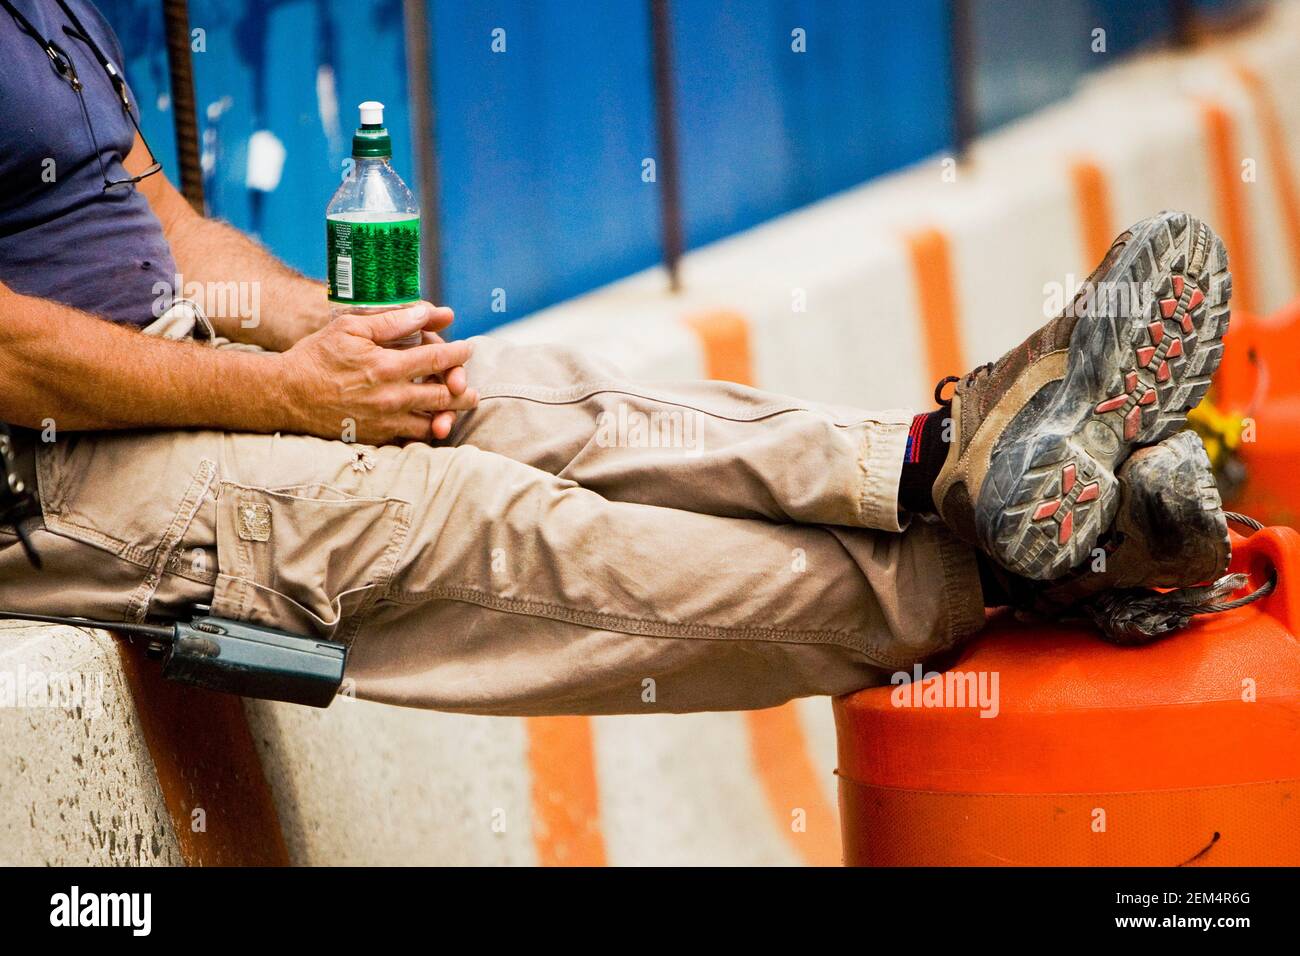 Low section view of a man sitting on a wall and holding a bottle Stock Photo